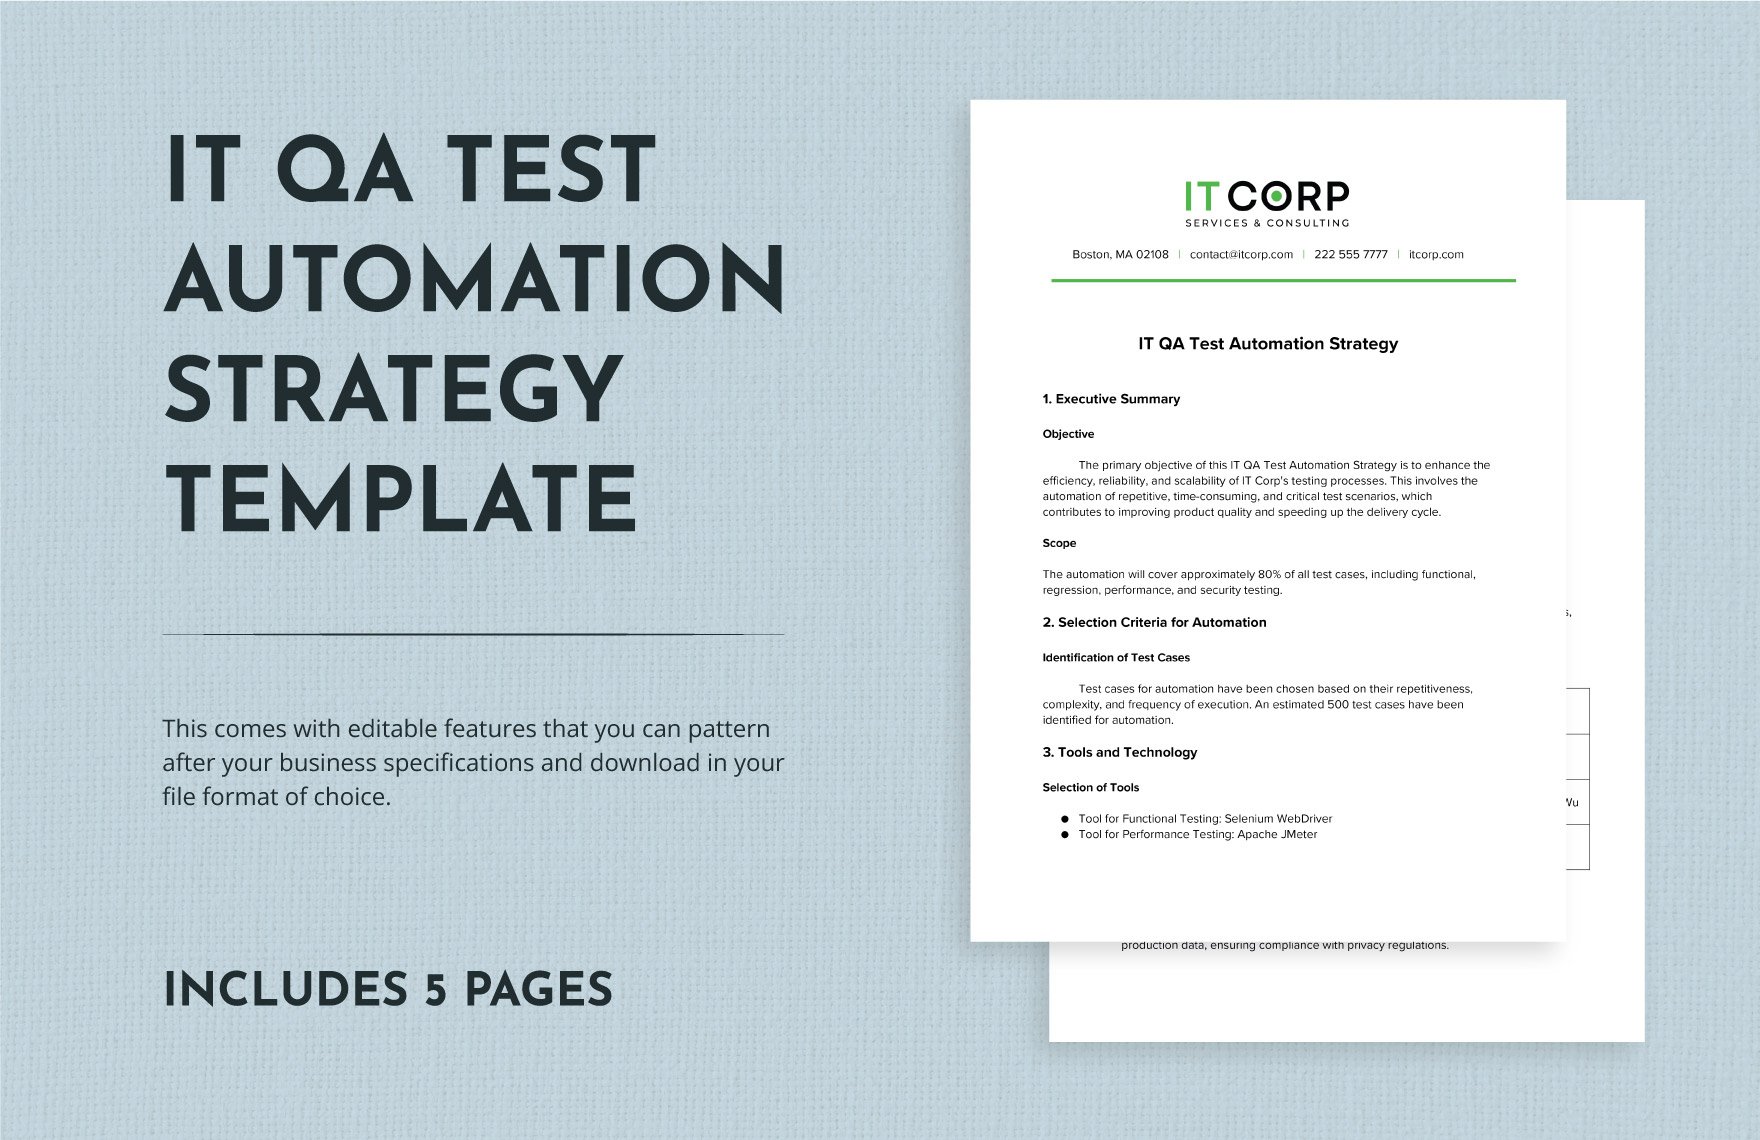 IT QA Test Automation Strategy Template